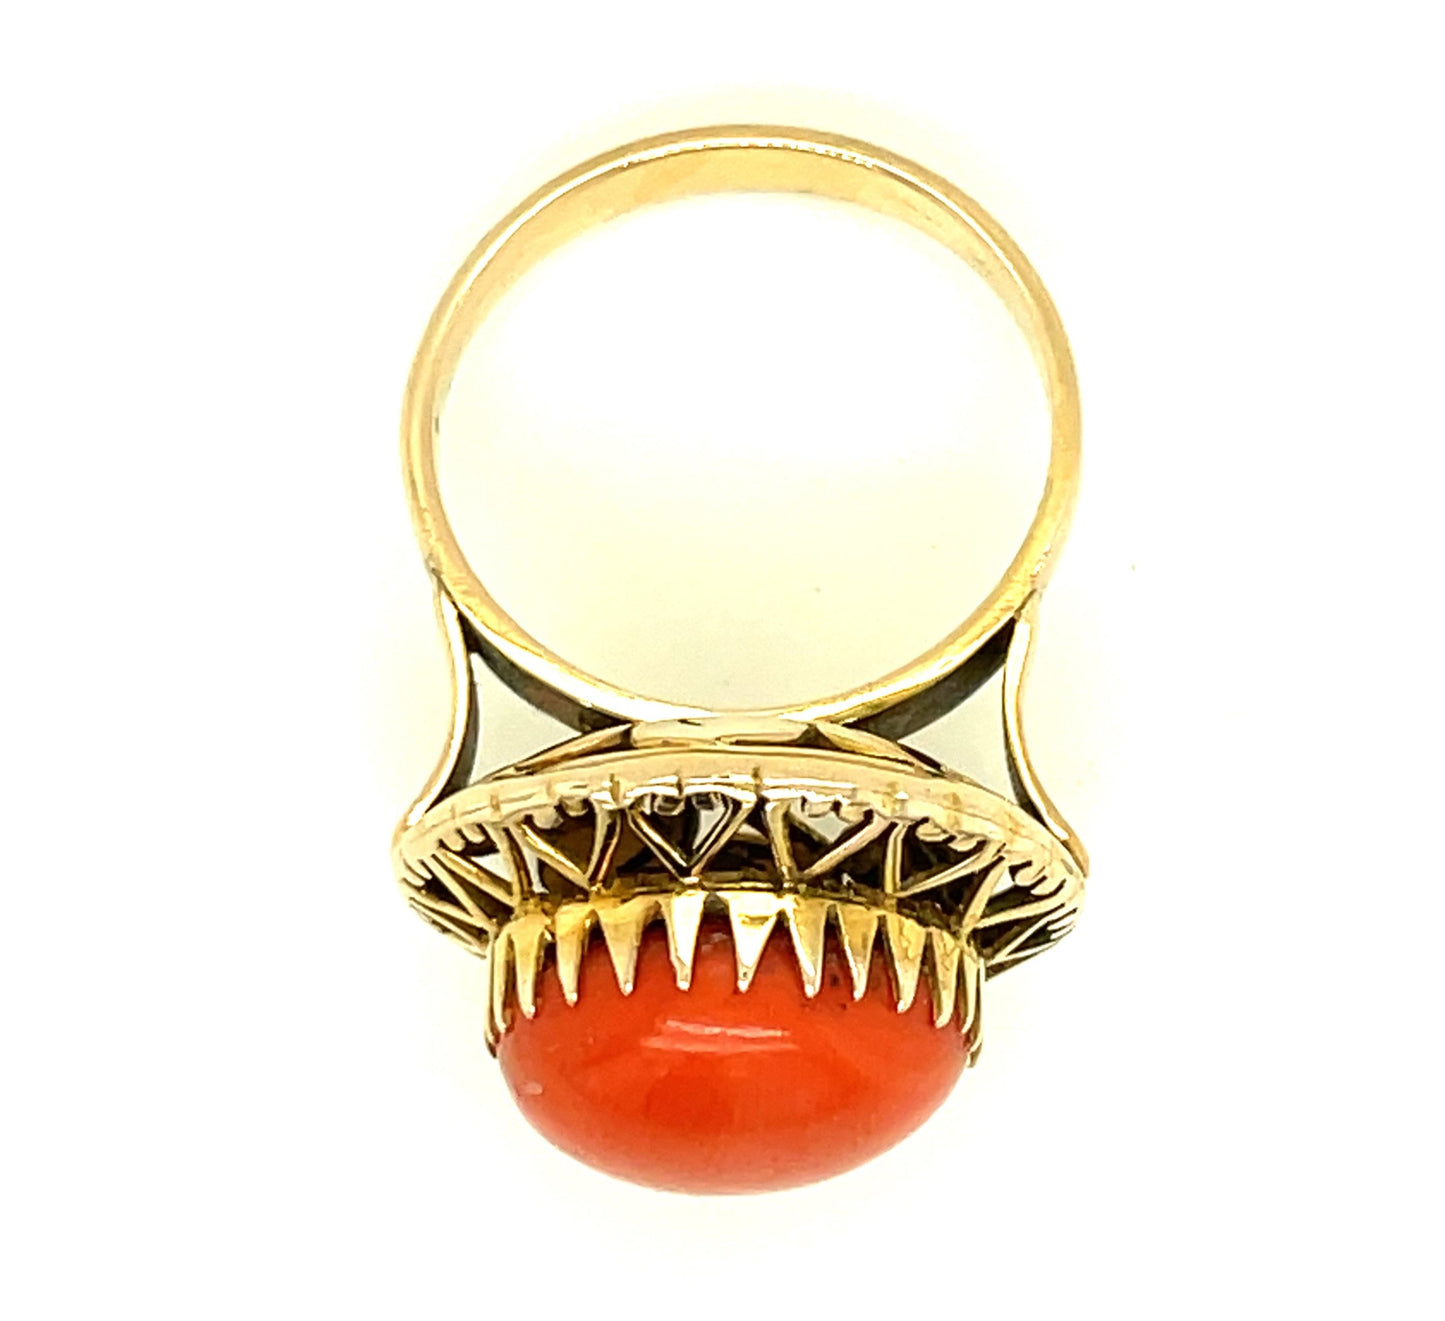 Vintage 14k Yellow Gold and Coral Filigree Ring Size 7 1/2